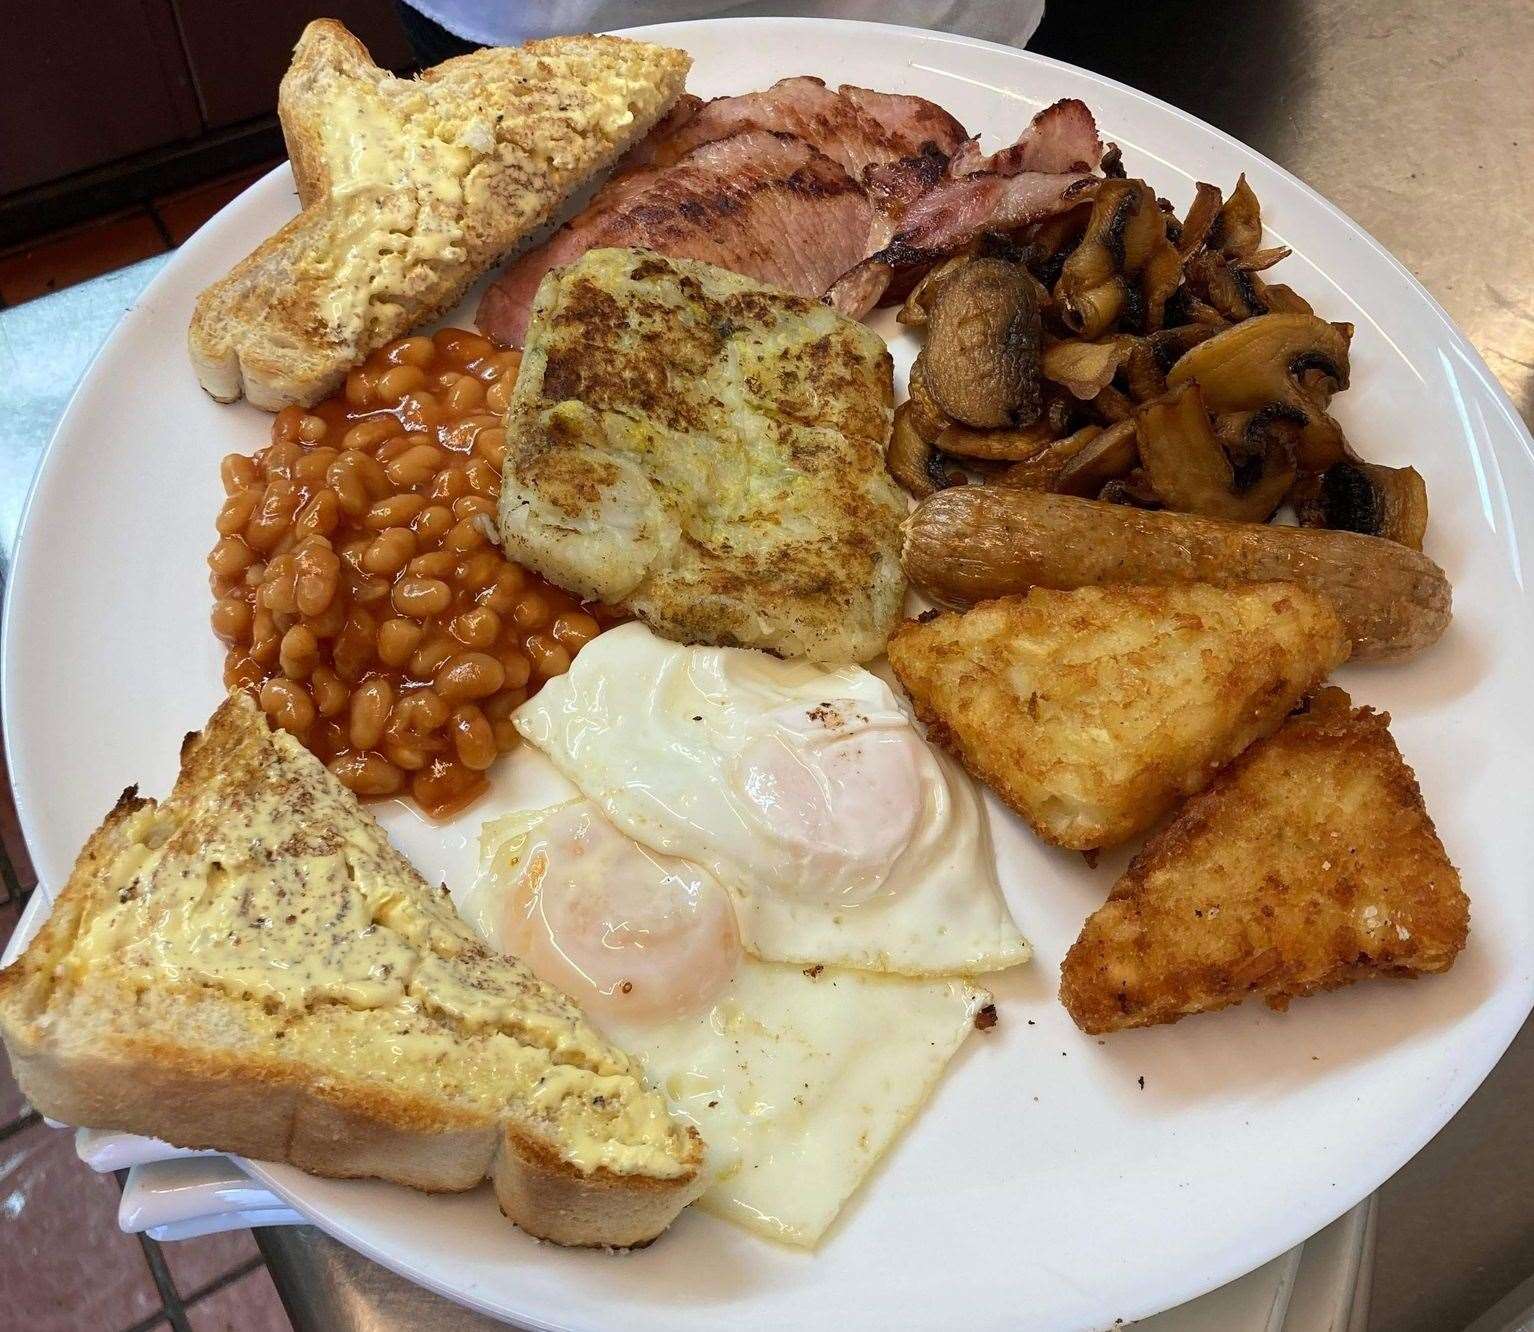 The café sells traditional English breakfasts amongst other meals. Picture: Brian Sanders